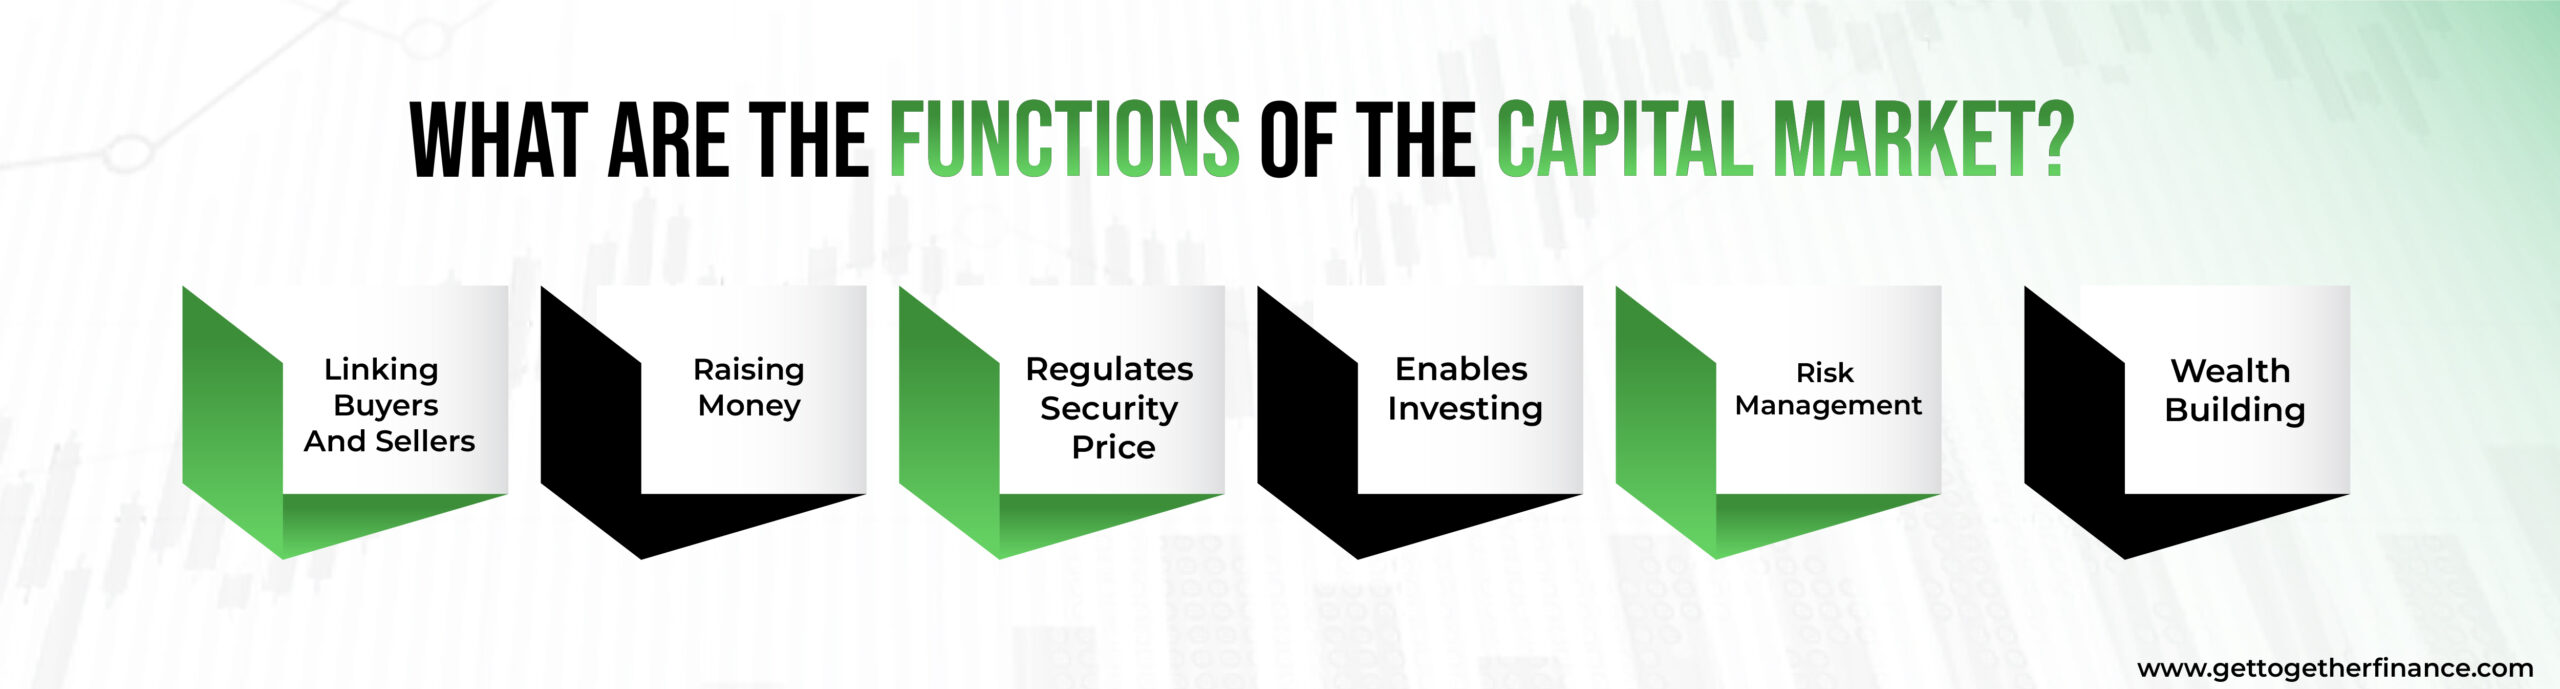 functions of capital market 